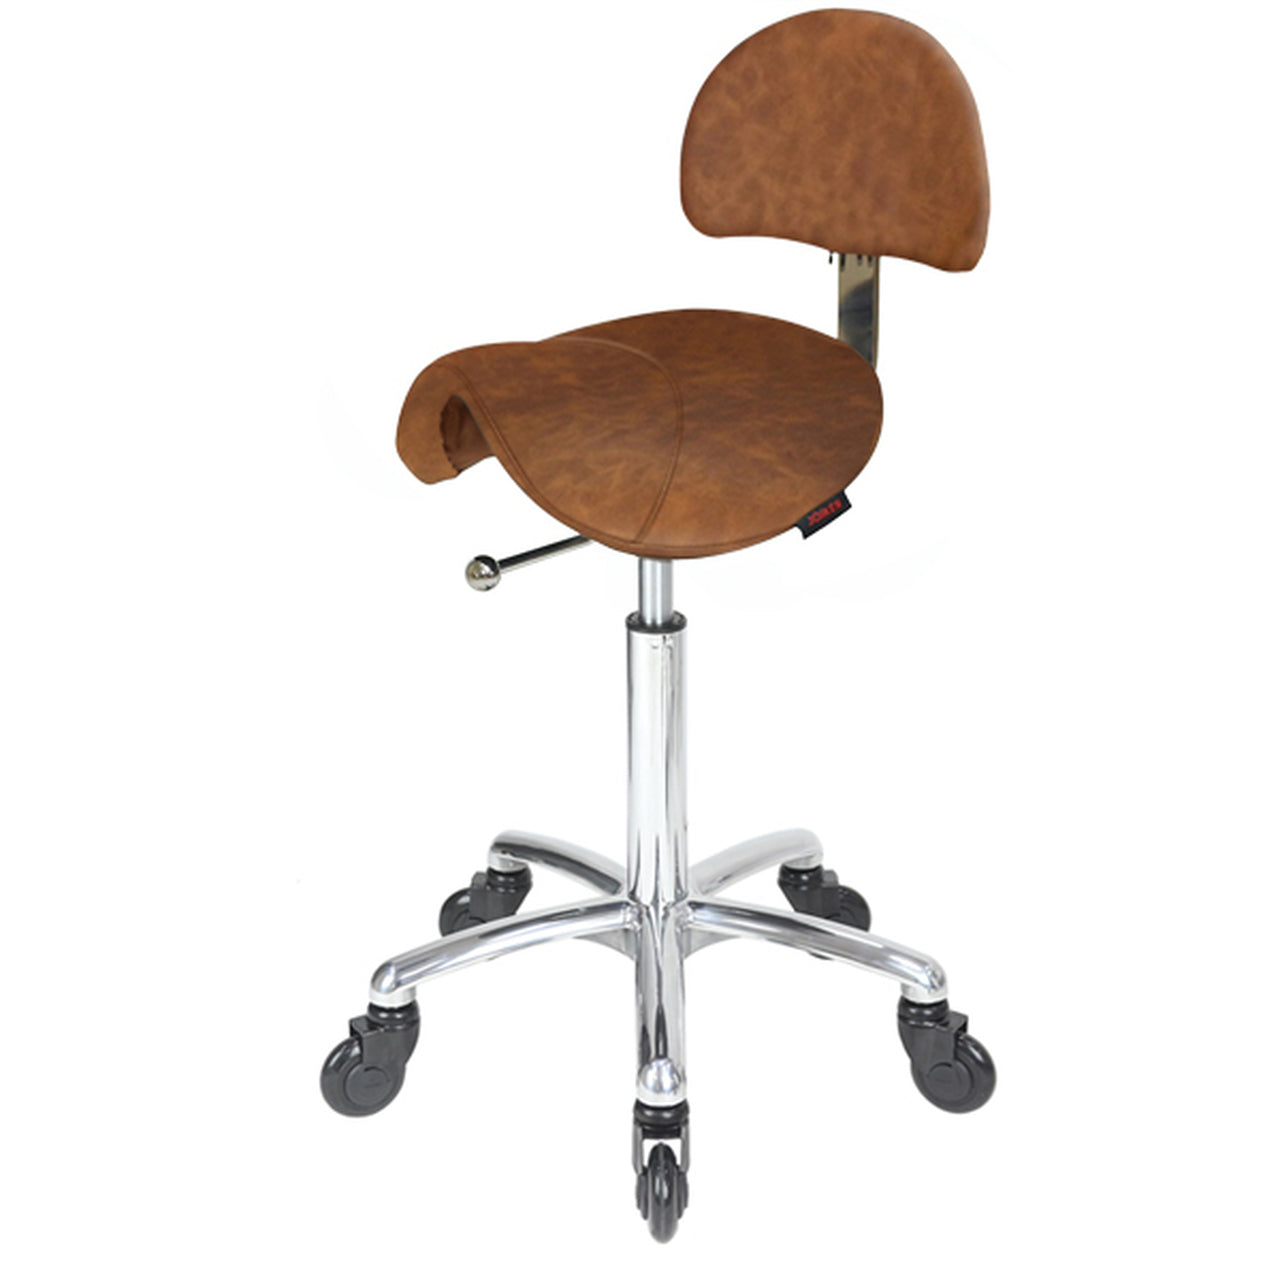 Saddle - With Back - Chrome Base - (TAN Upholstery)
With CLICK'NCLEAN Castors